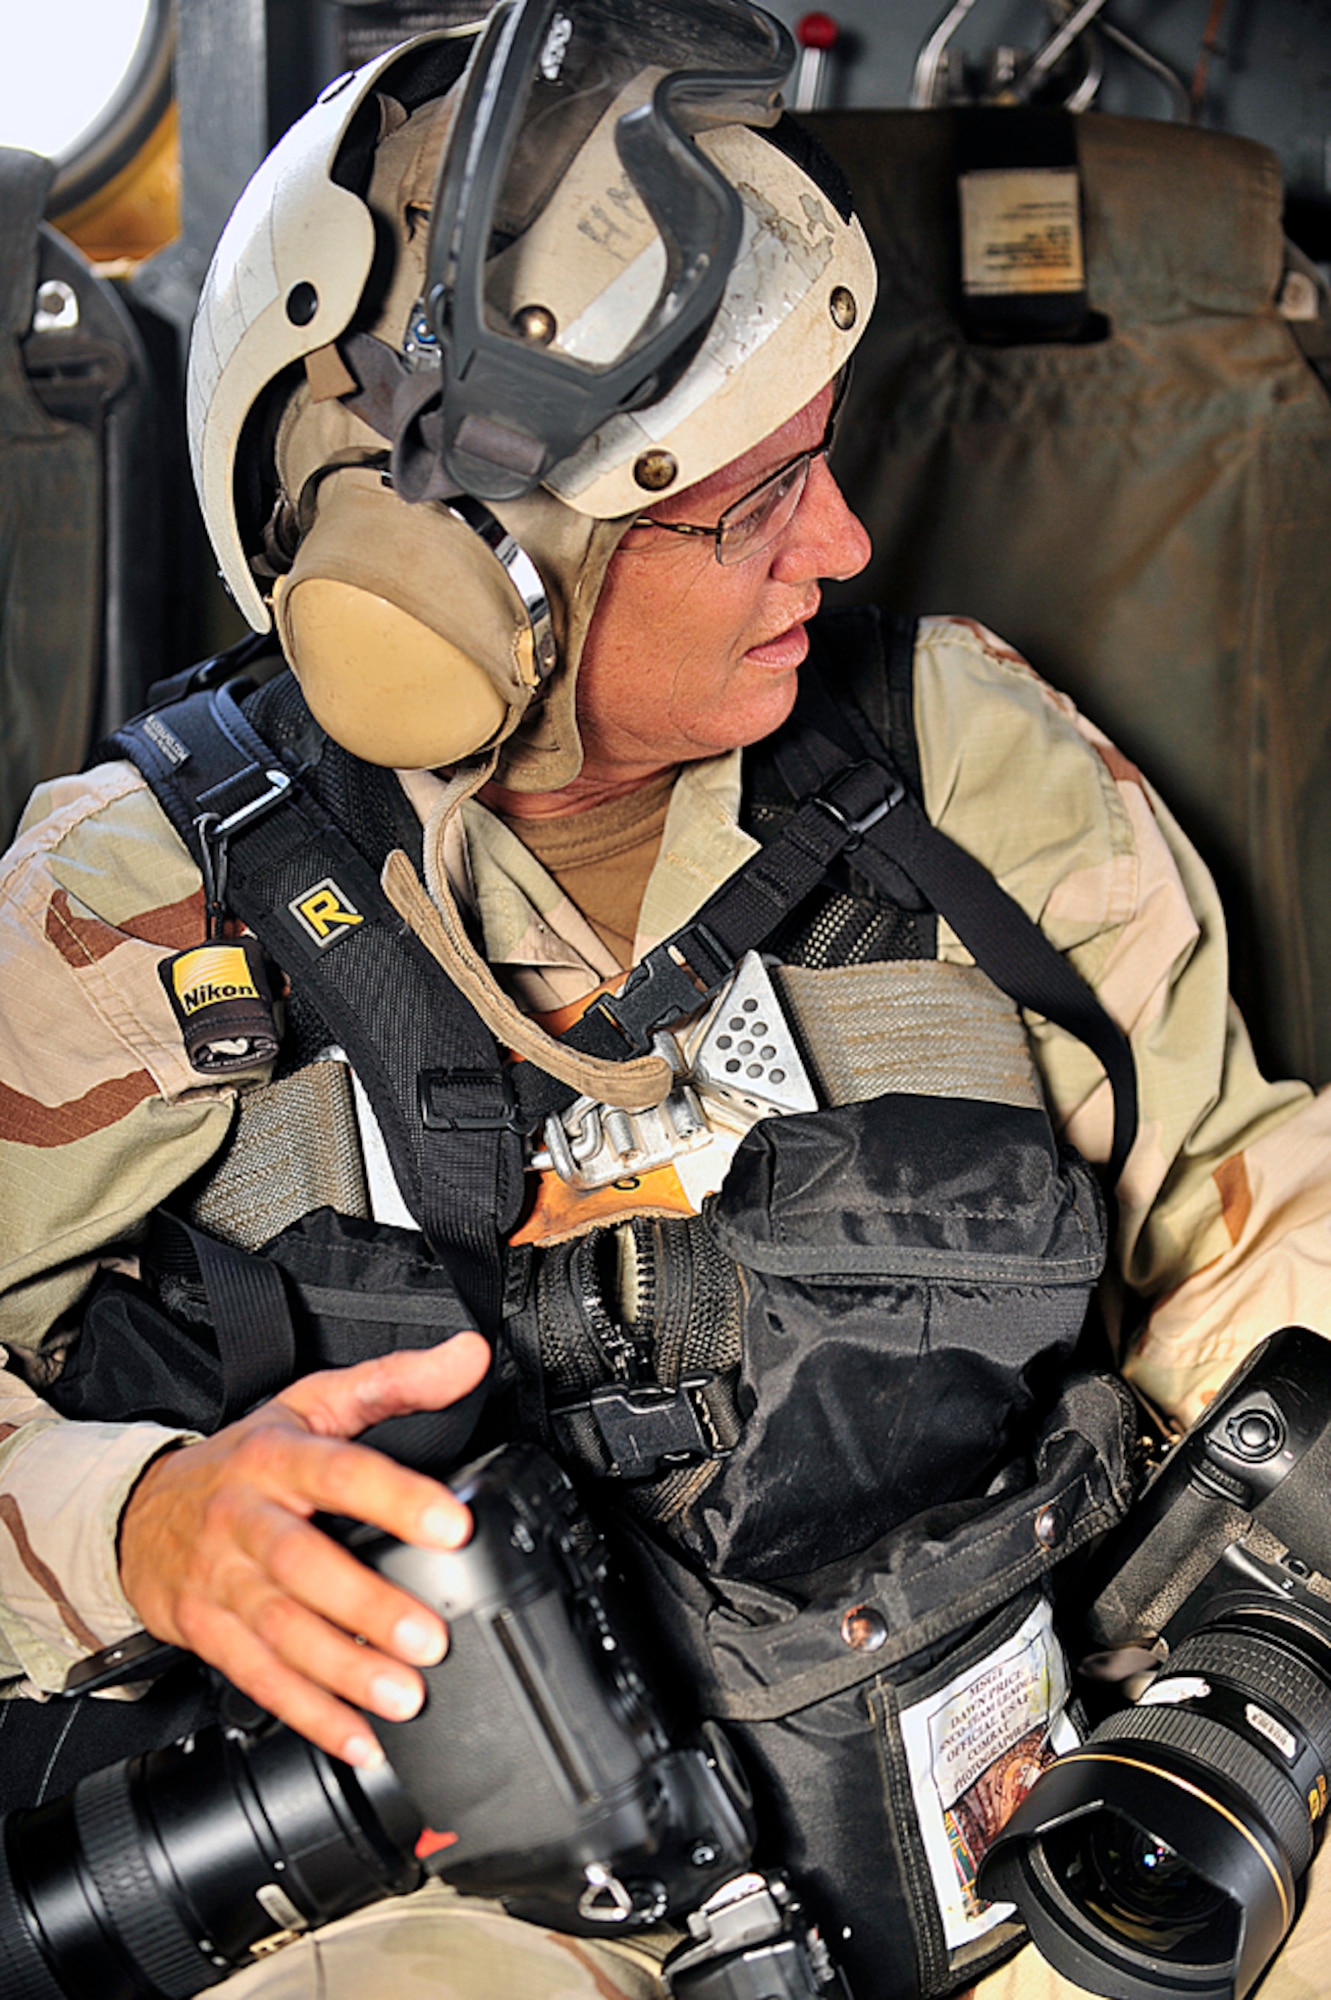 Combat Cameraman Master Sgt. Dawn Price aboard a U.S. Marine Corps MH-53 helicopter over the Gulf of Tadjora between Djibouti and Yemen. (U.S. Army Photo/Spec. Michelle Lawrence)